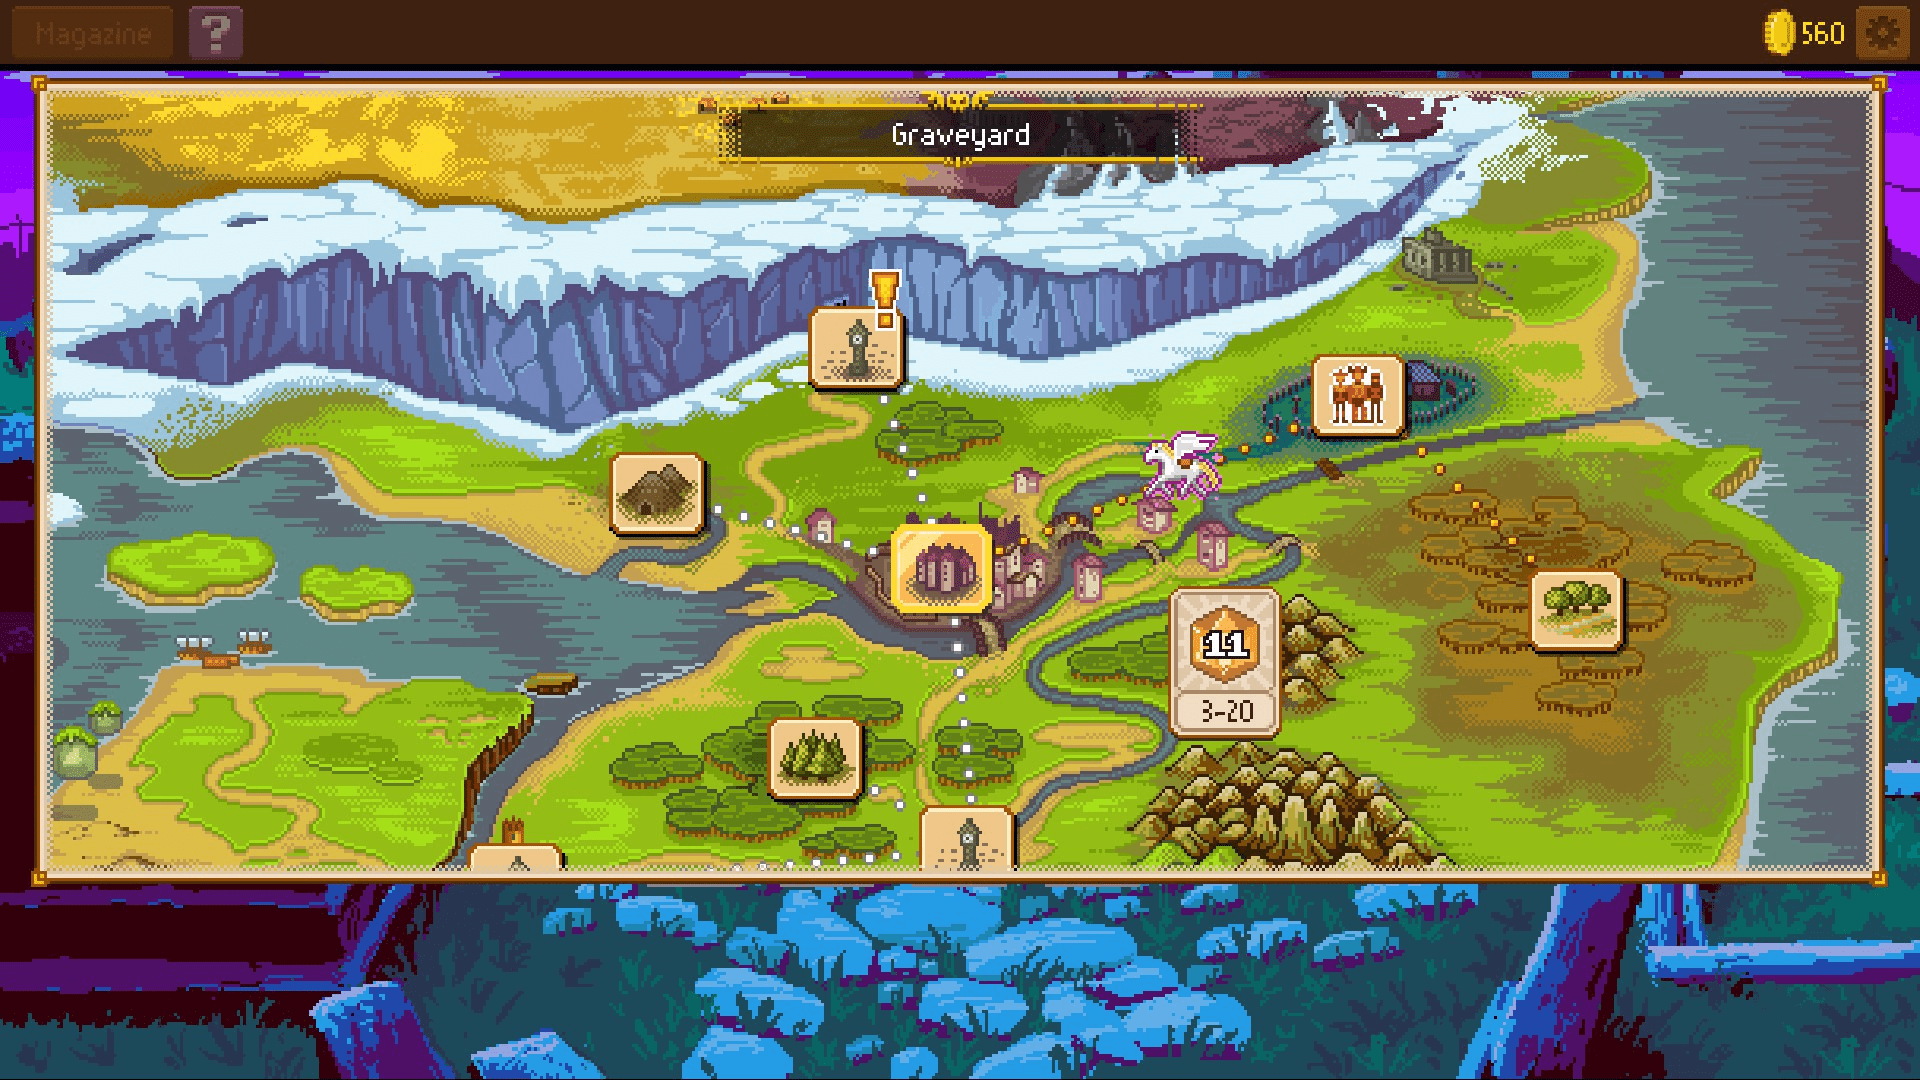 Knights of Pen and Paper 2 world map